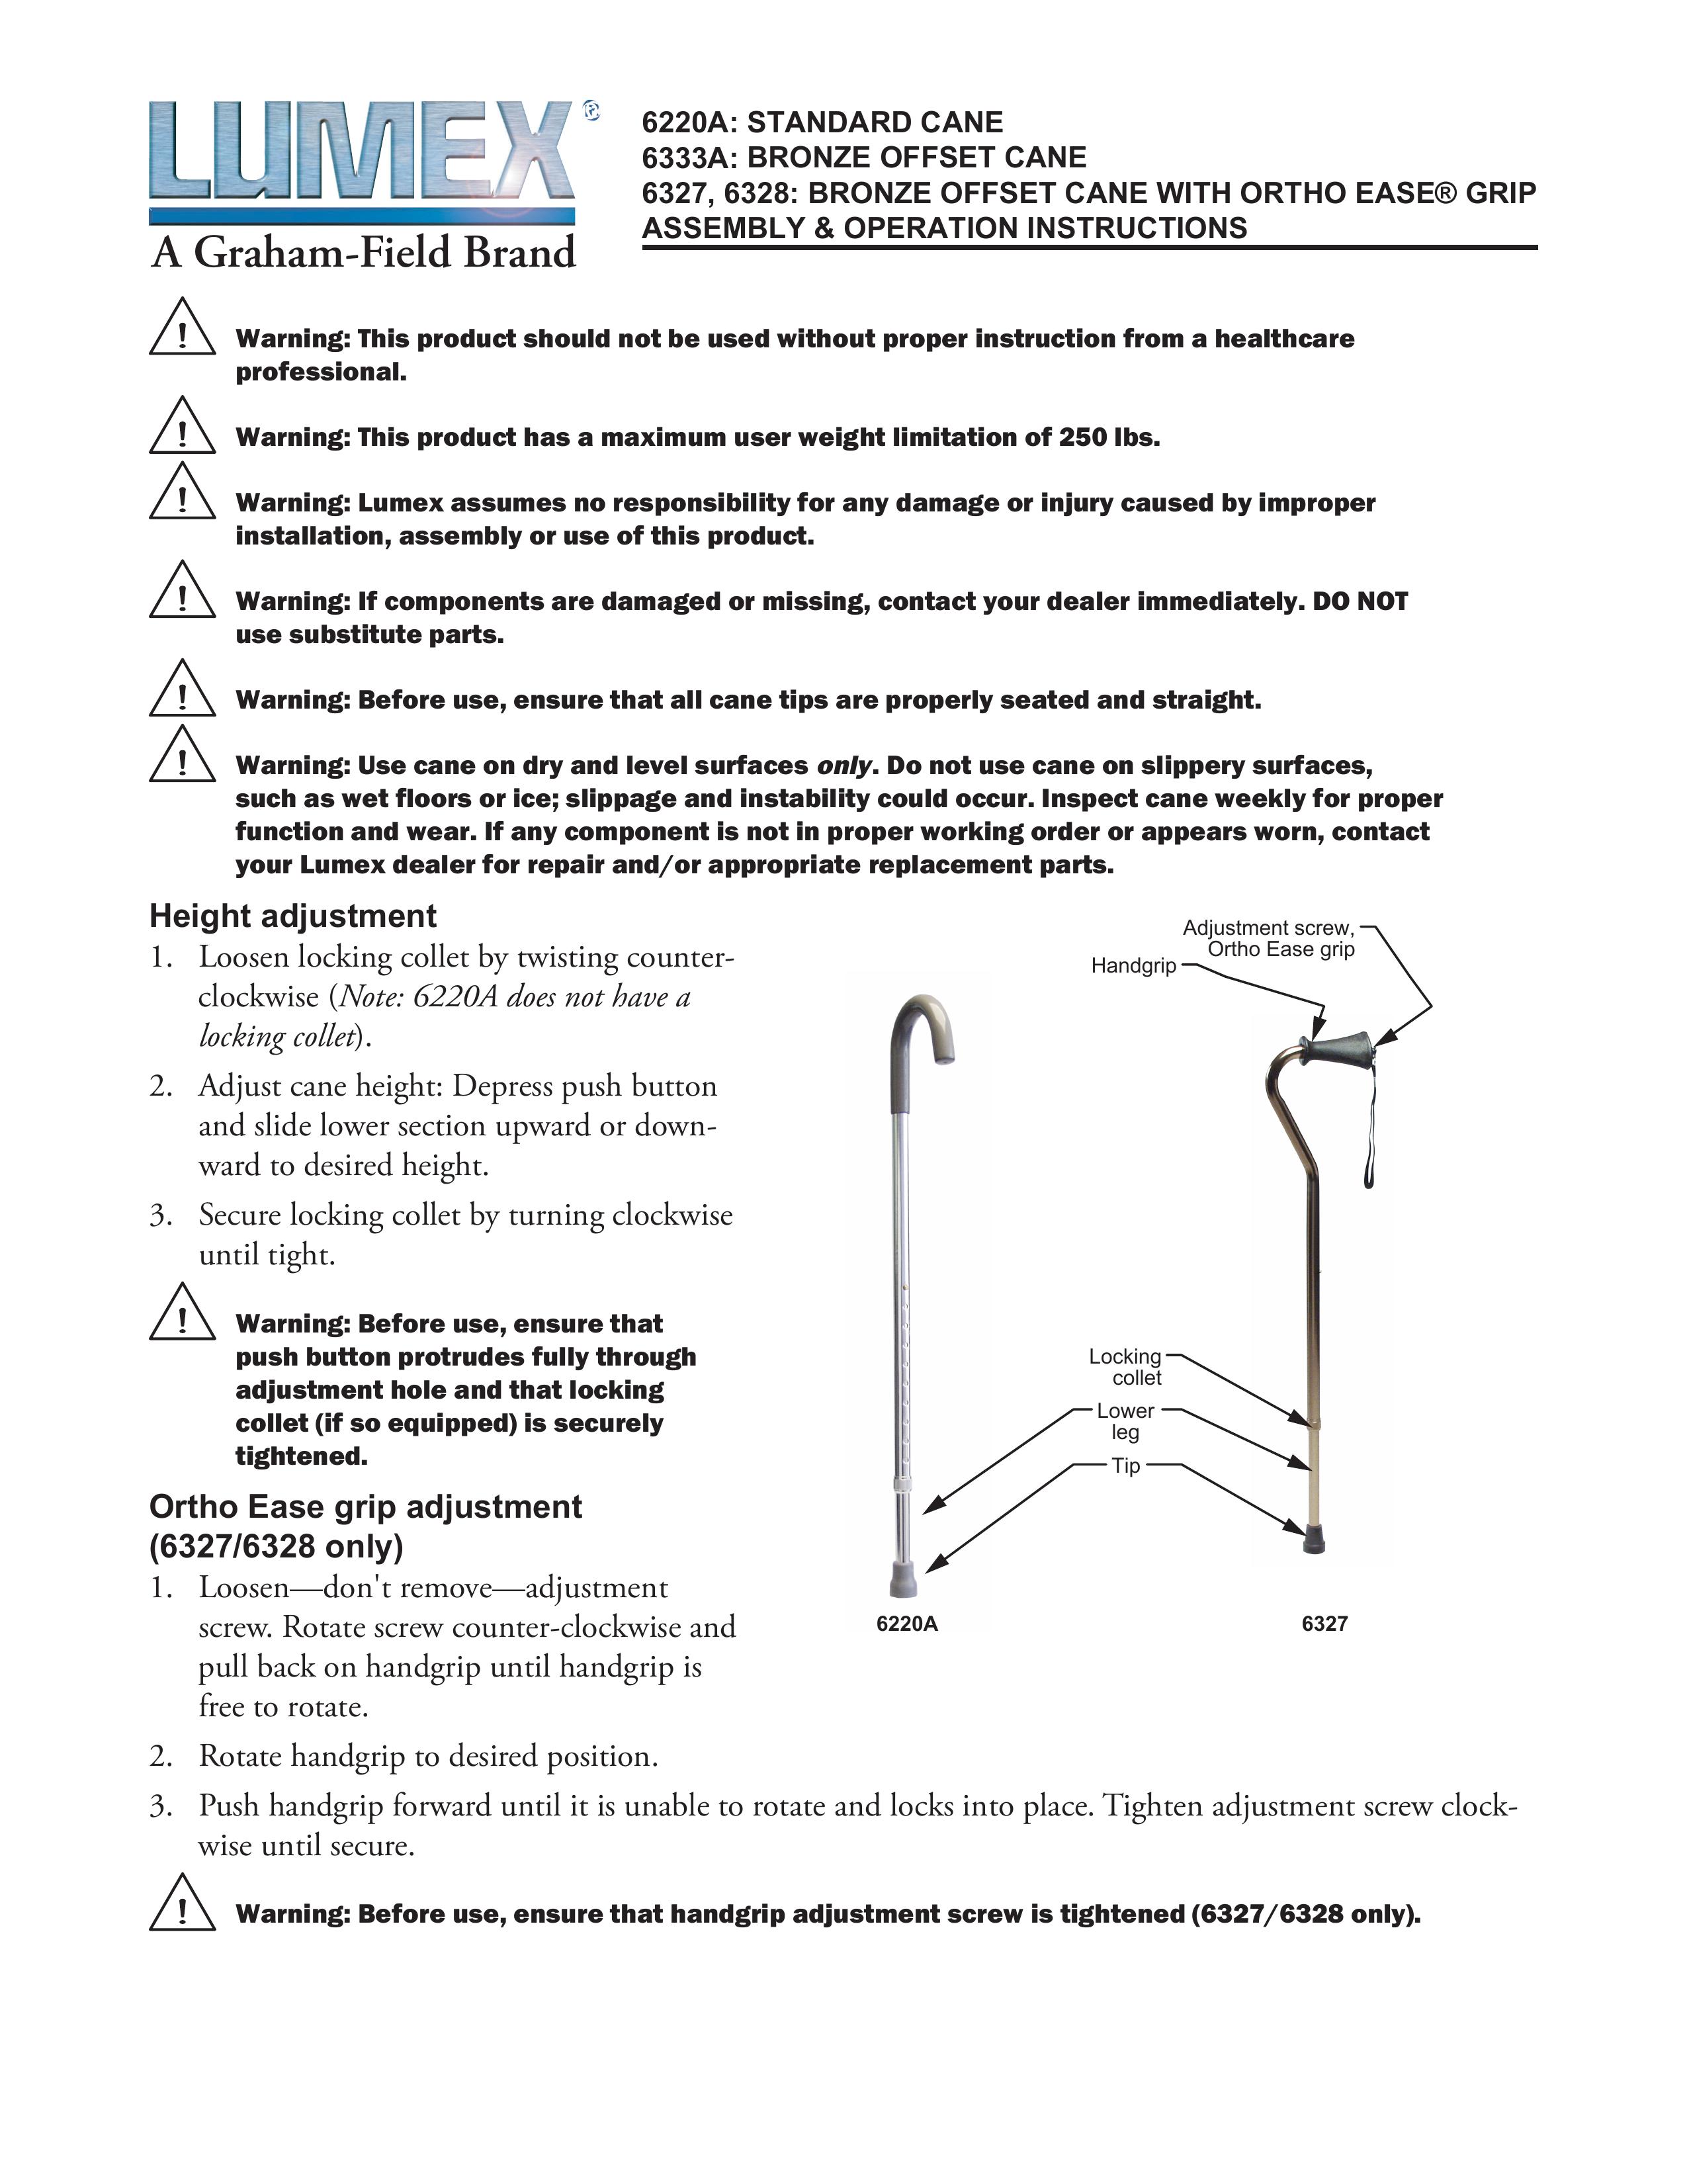 Graham Field 6333A Mobility Aid User Manual